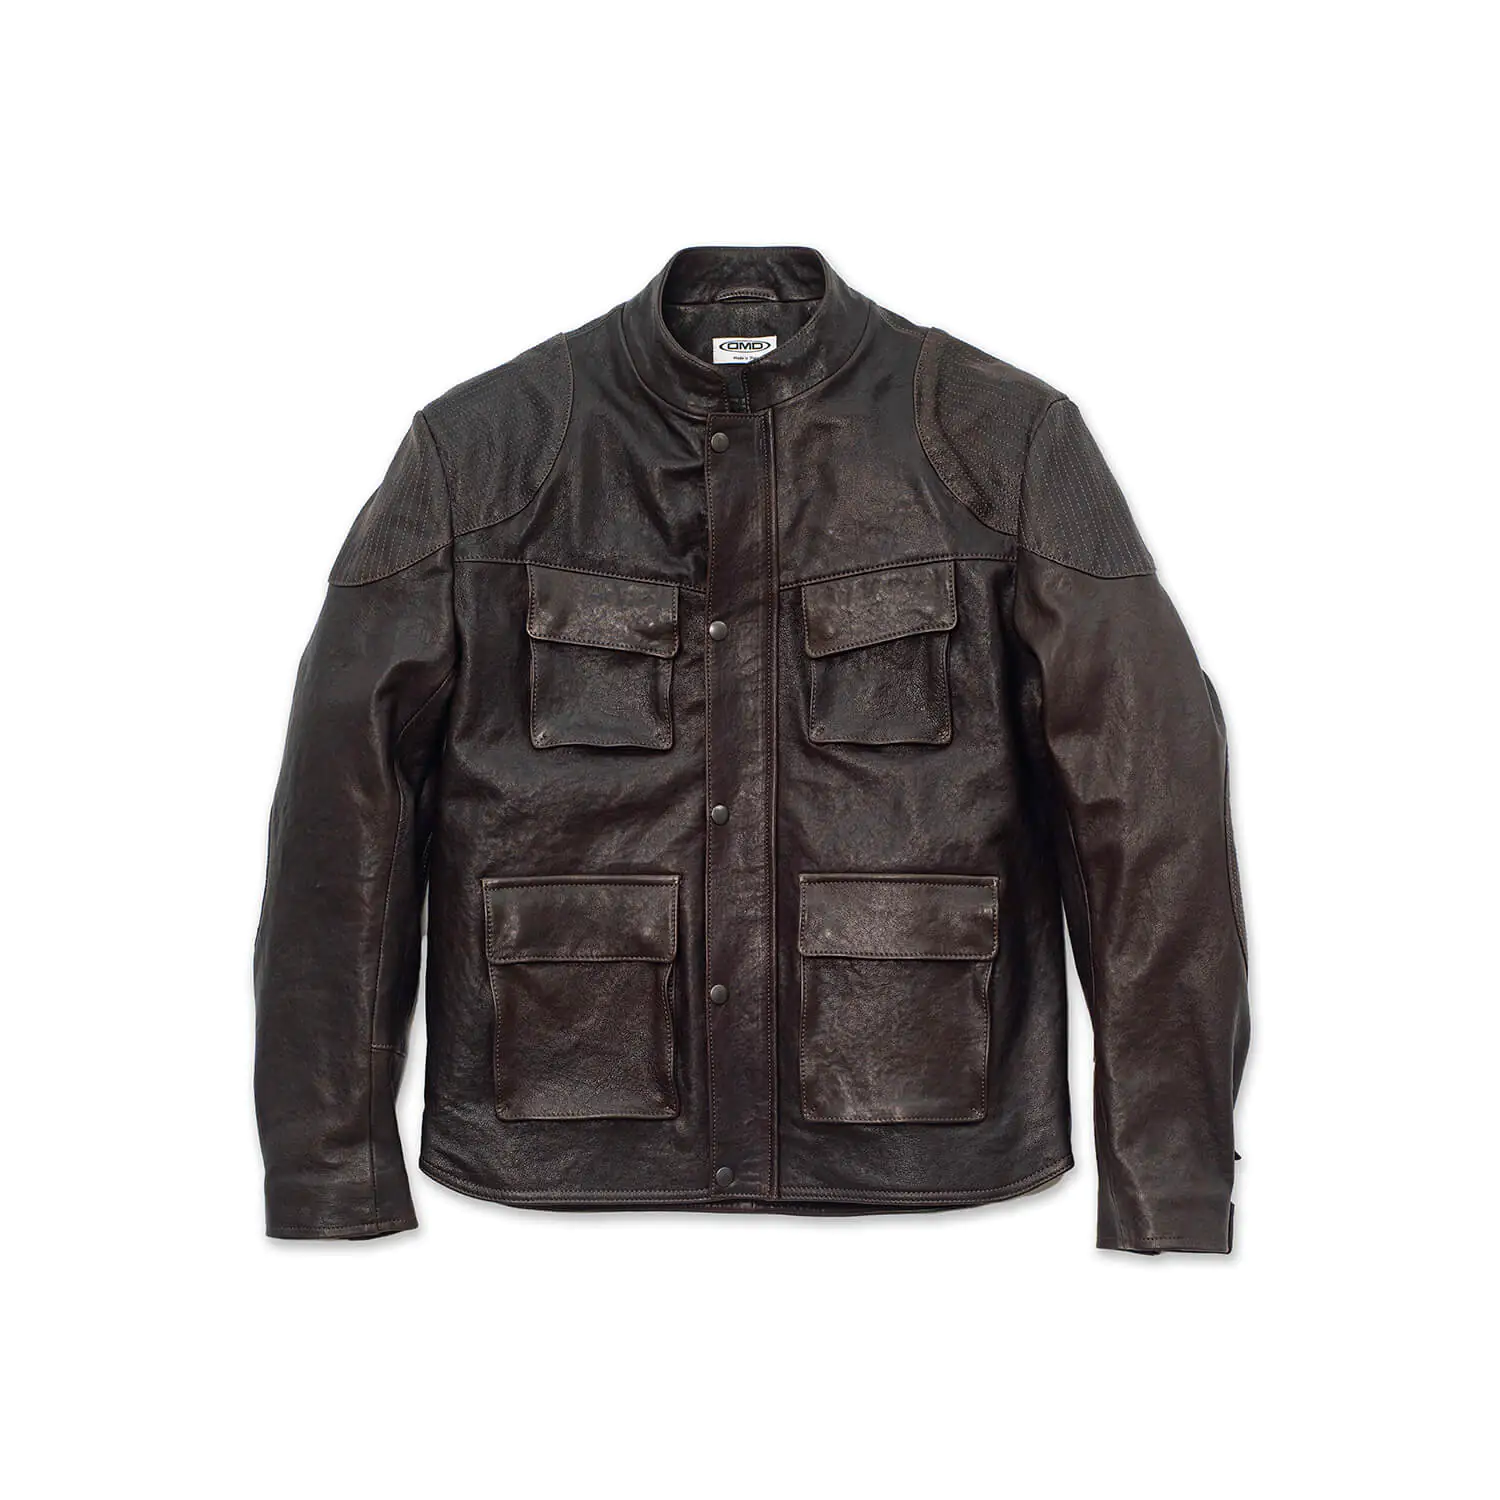 dmd.eu - SOLO RIDER BROWN DMD – Solo rider brown leather – front